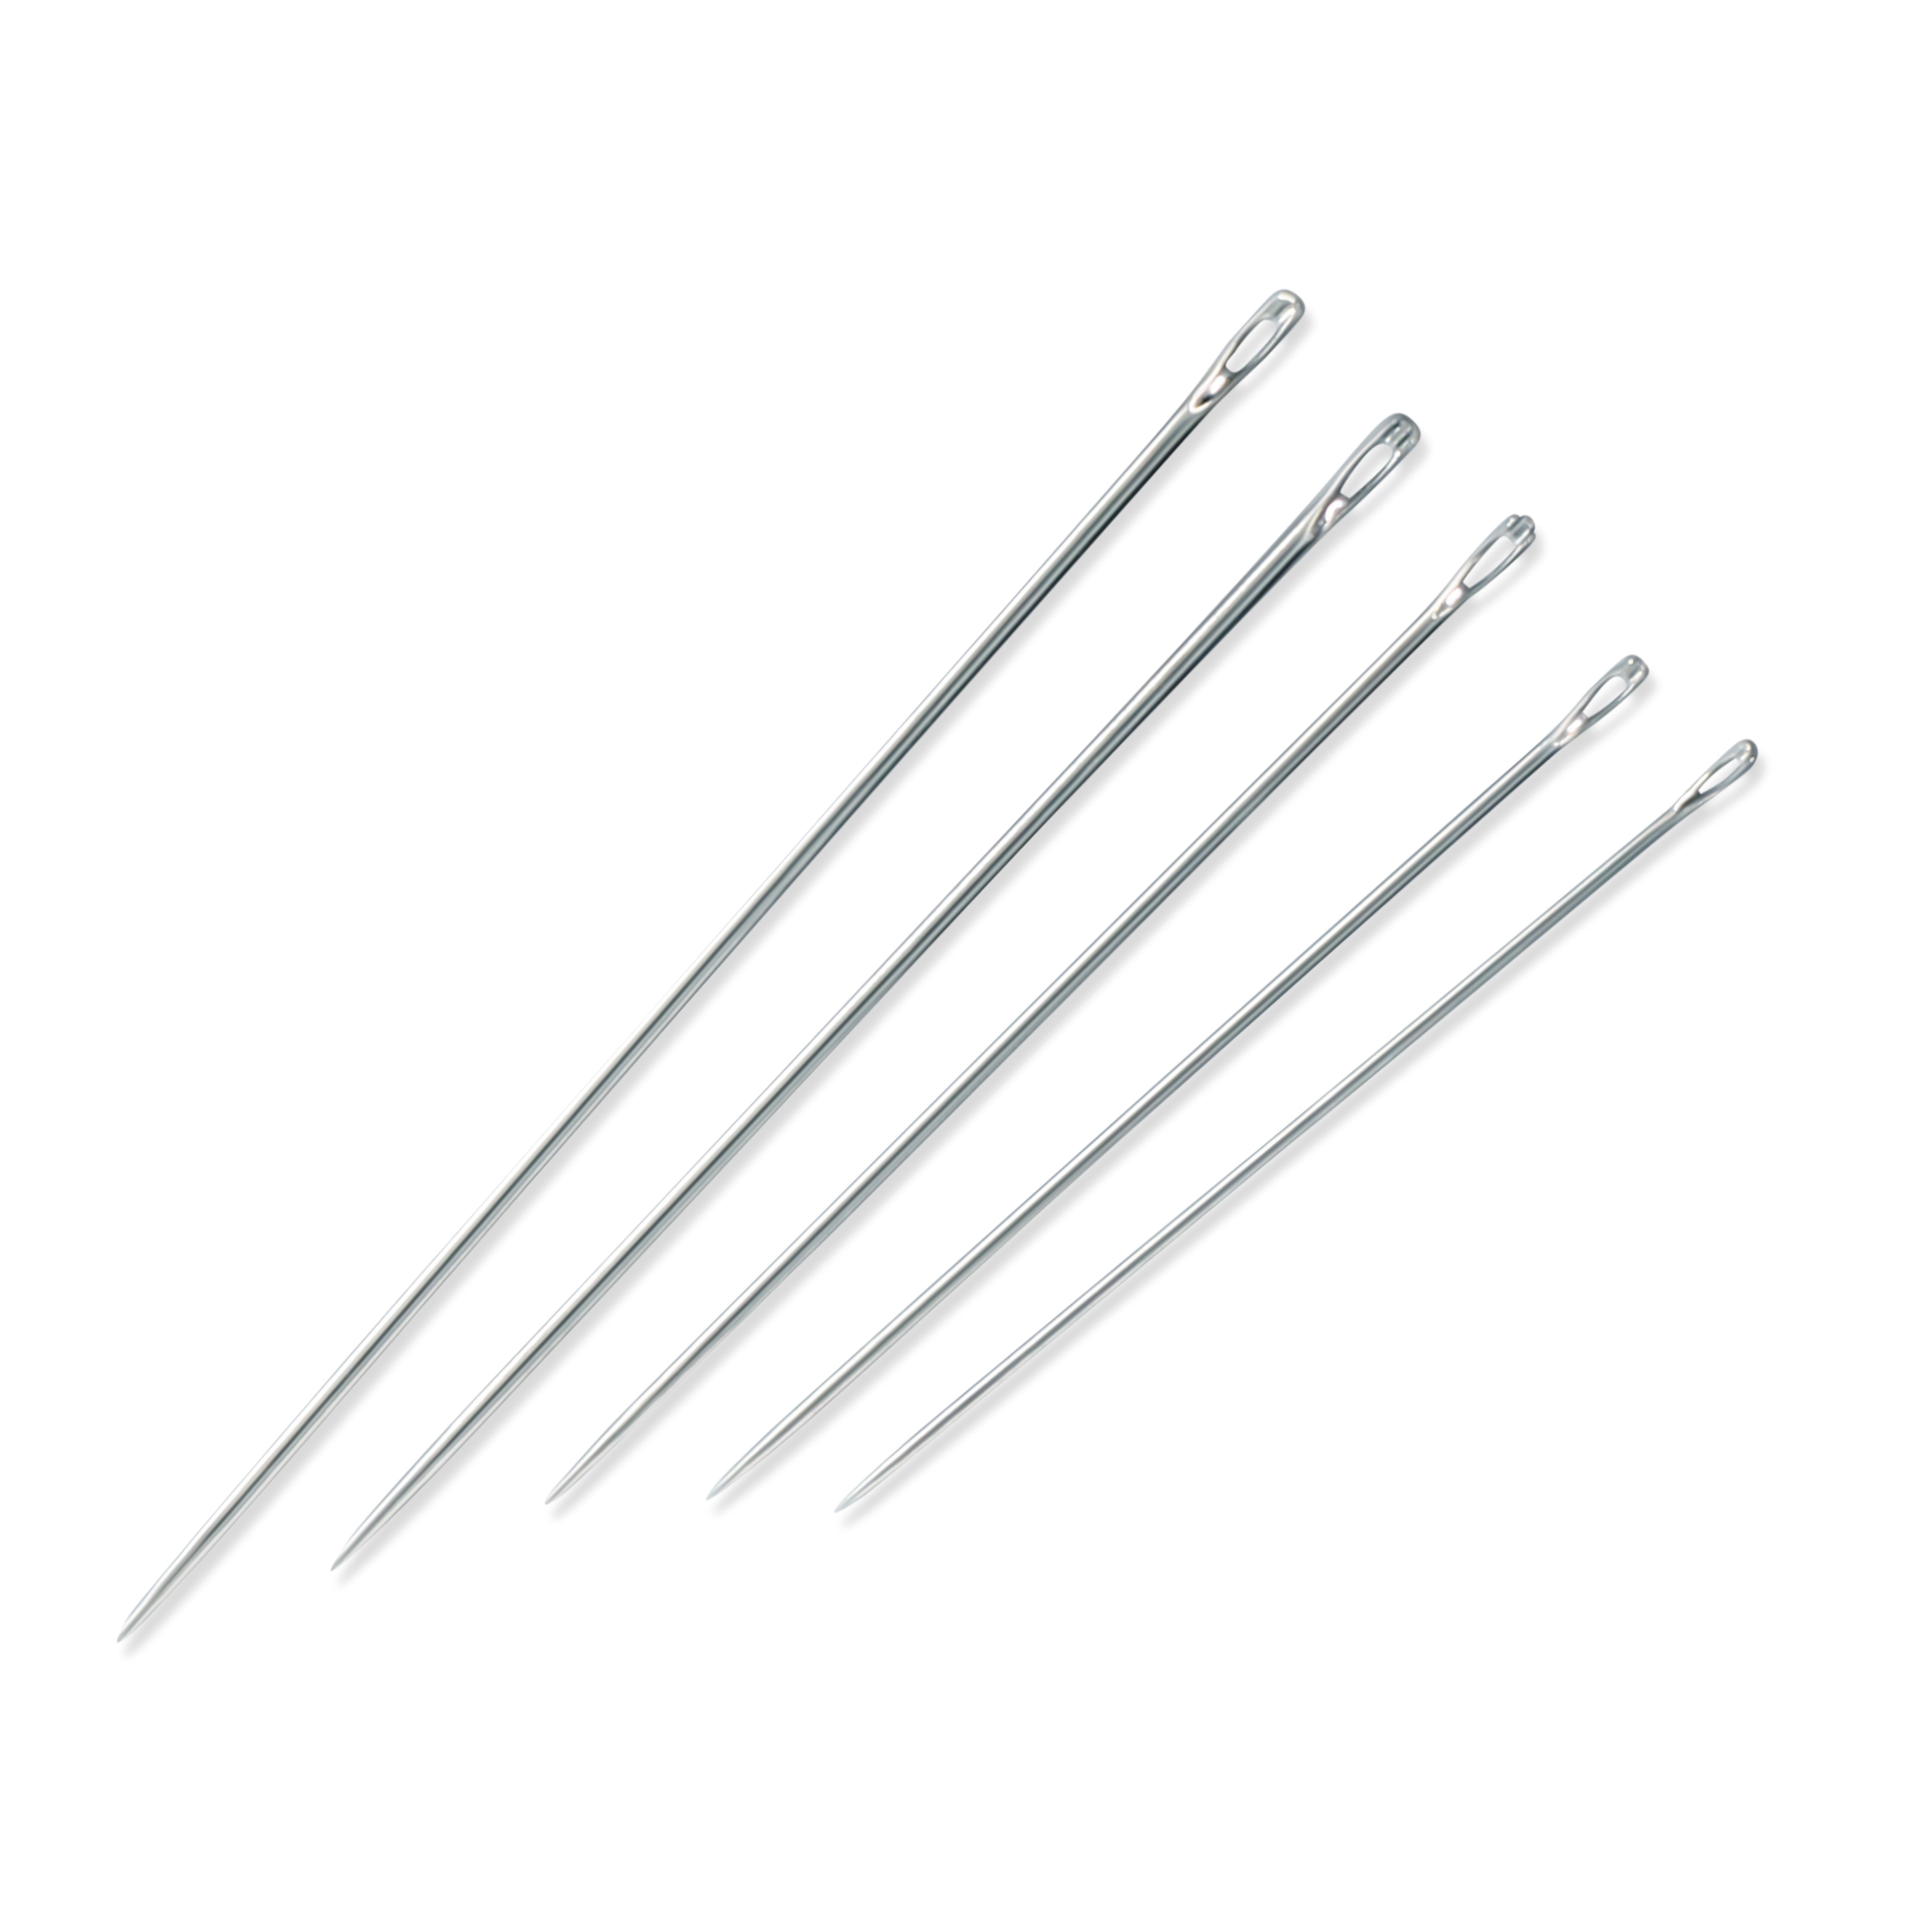 Dritz Curved Basting Pins 3028 3031 – Good's Store Online